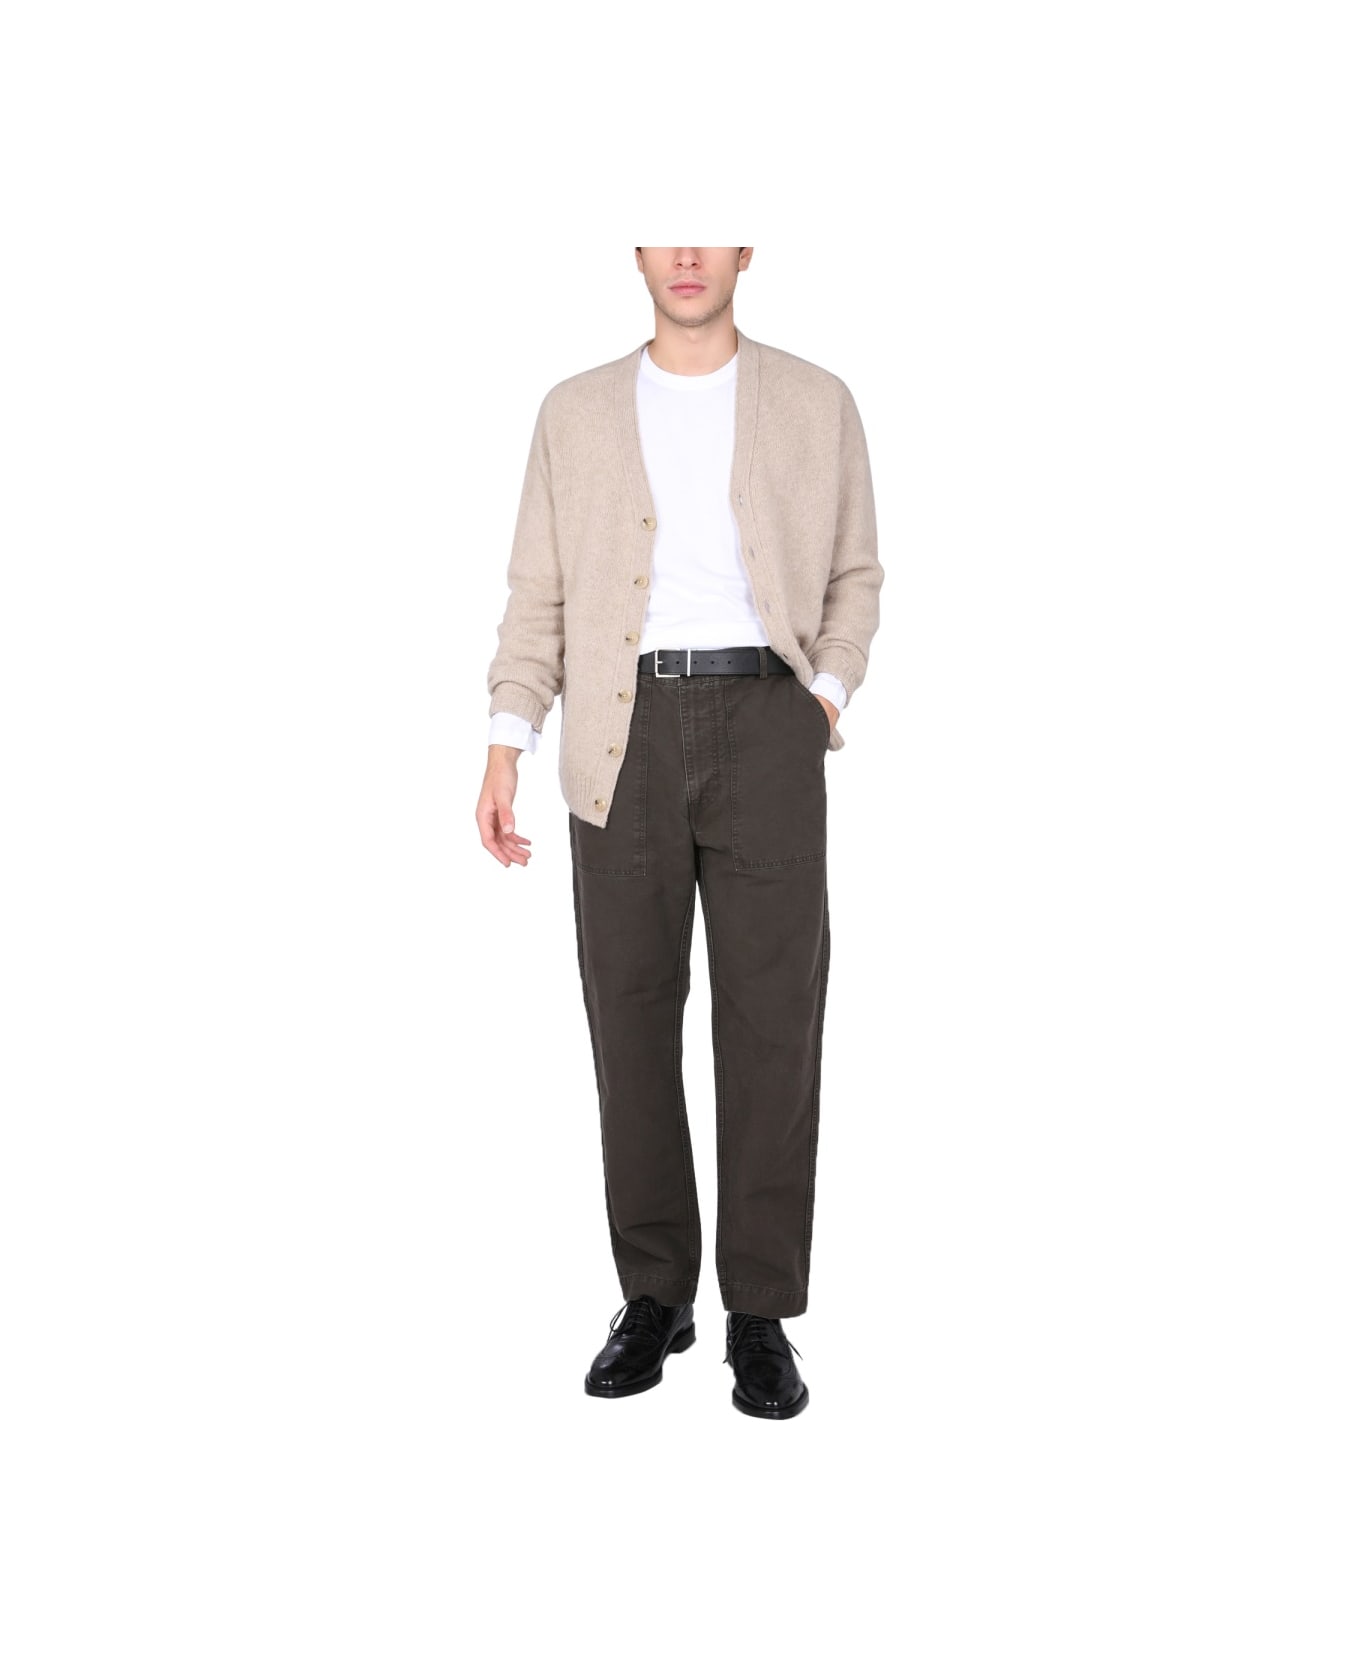 East Harbour Surplus "tommy" Trousers - BROWN